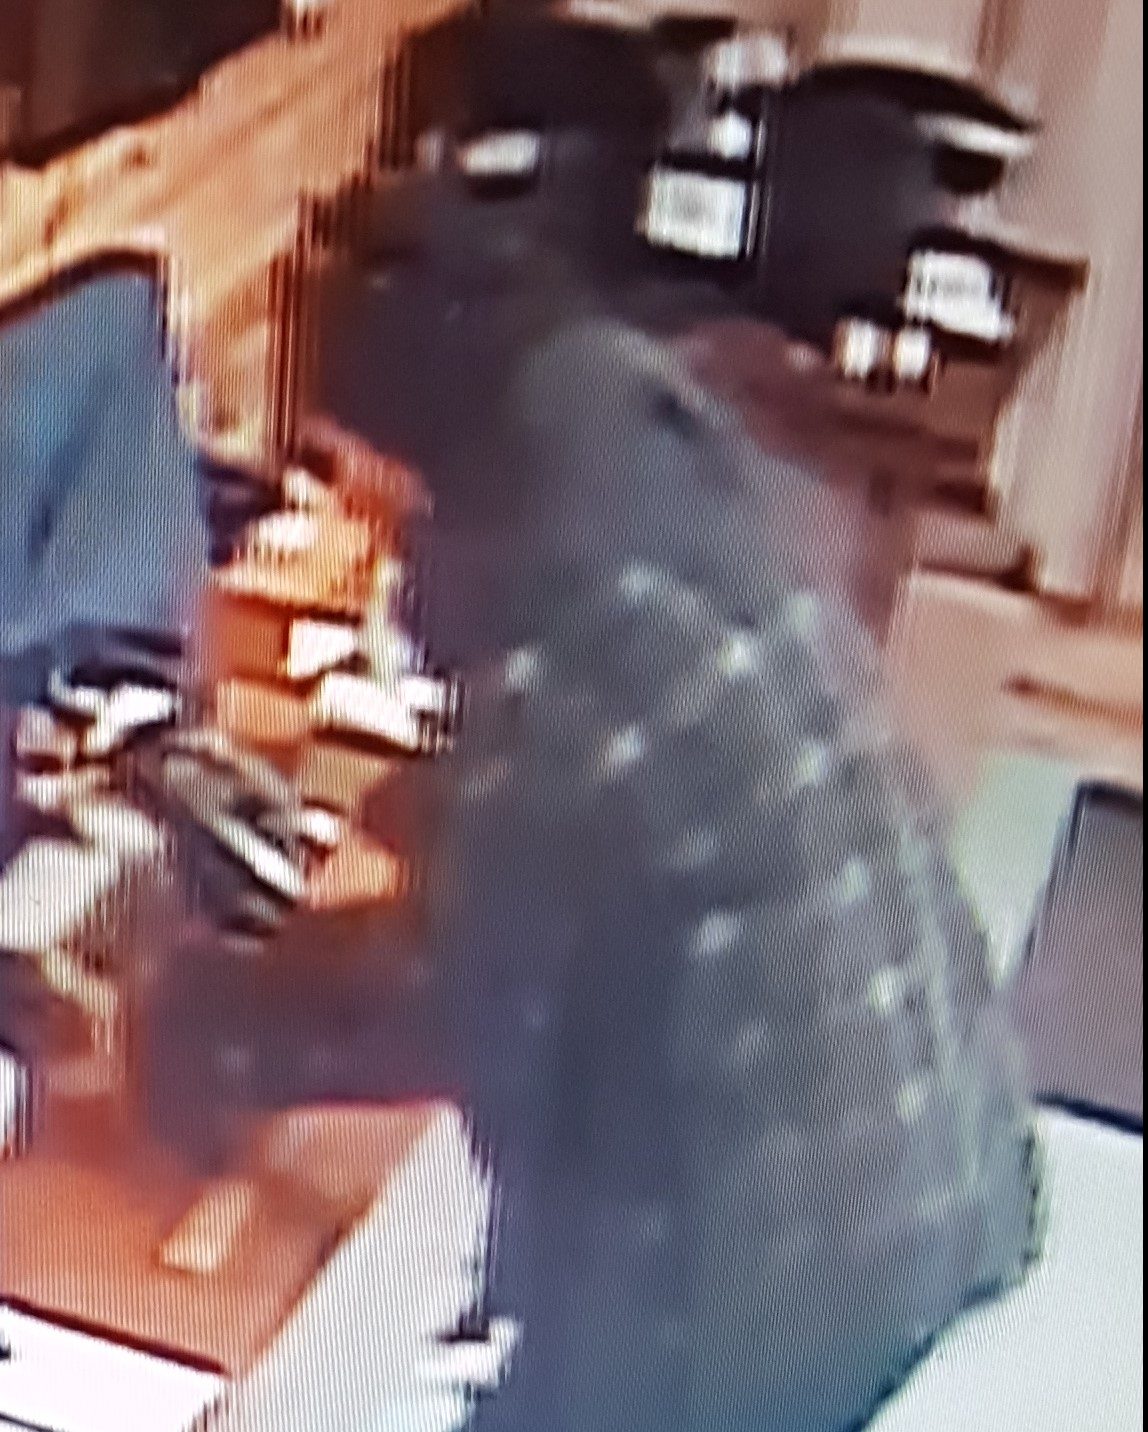 Peterborough OPP are seeking a suspect after an alleged theft at a Hiawatha First Nation business.